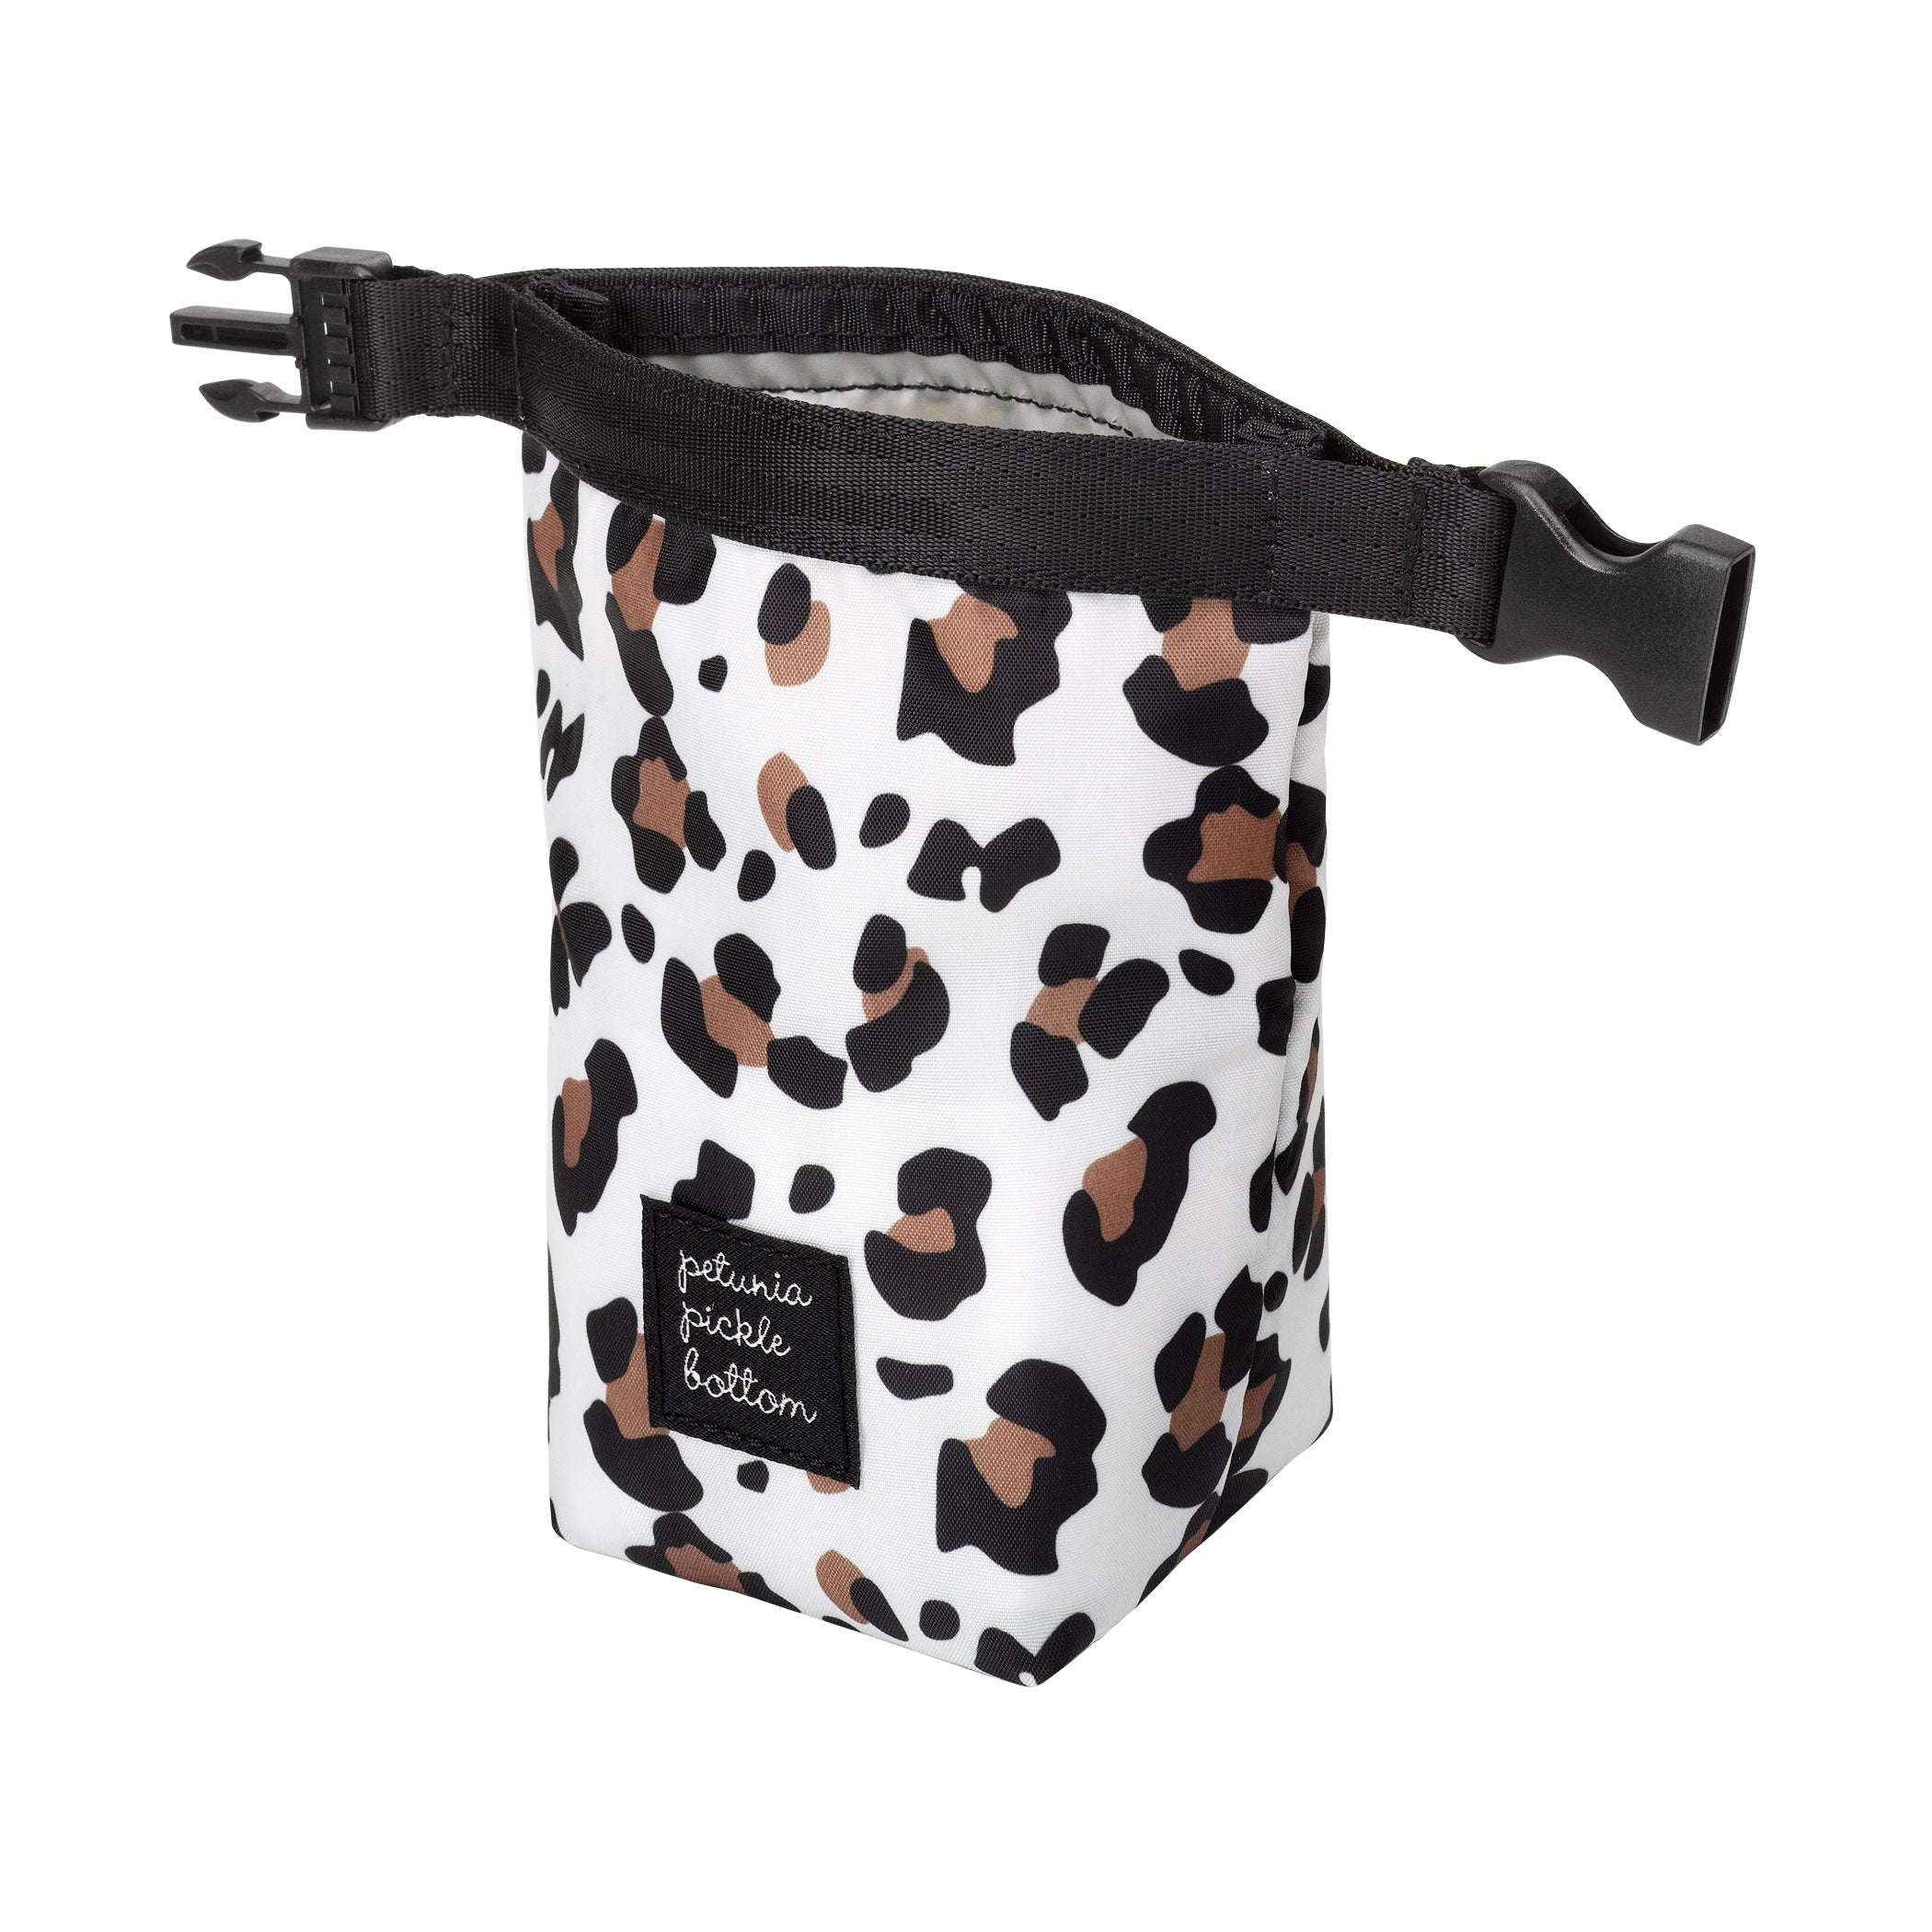 Petunia Pickle Bottom Snack Pouch in Moon Leopard Snack Bag